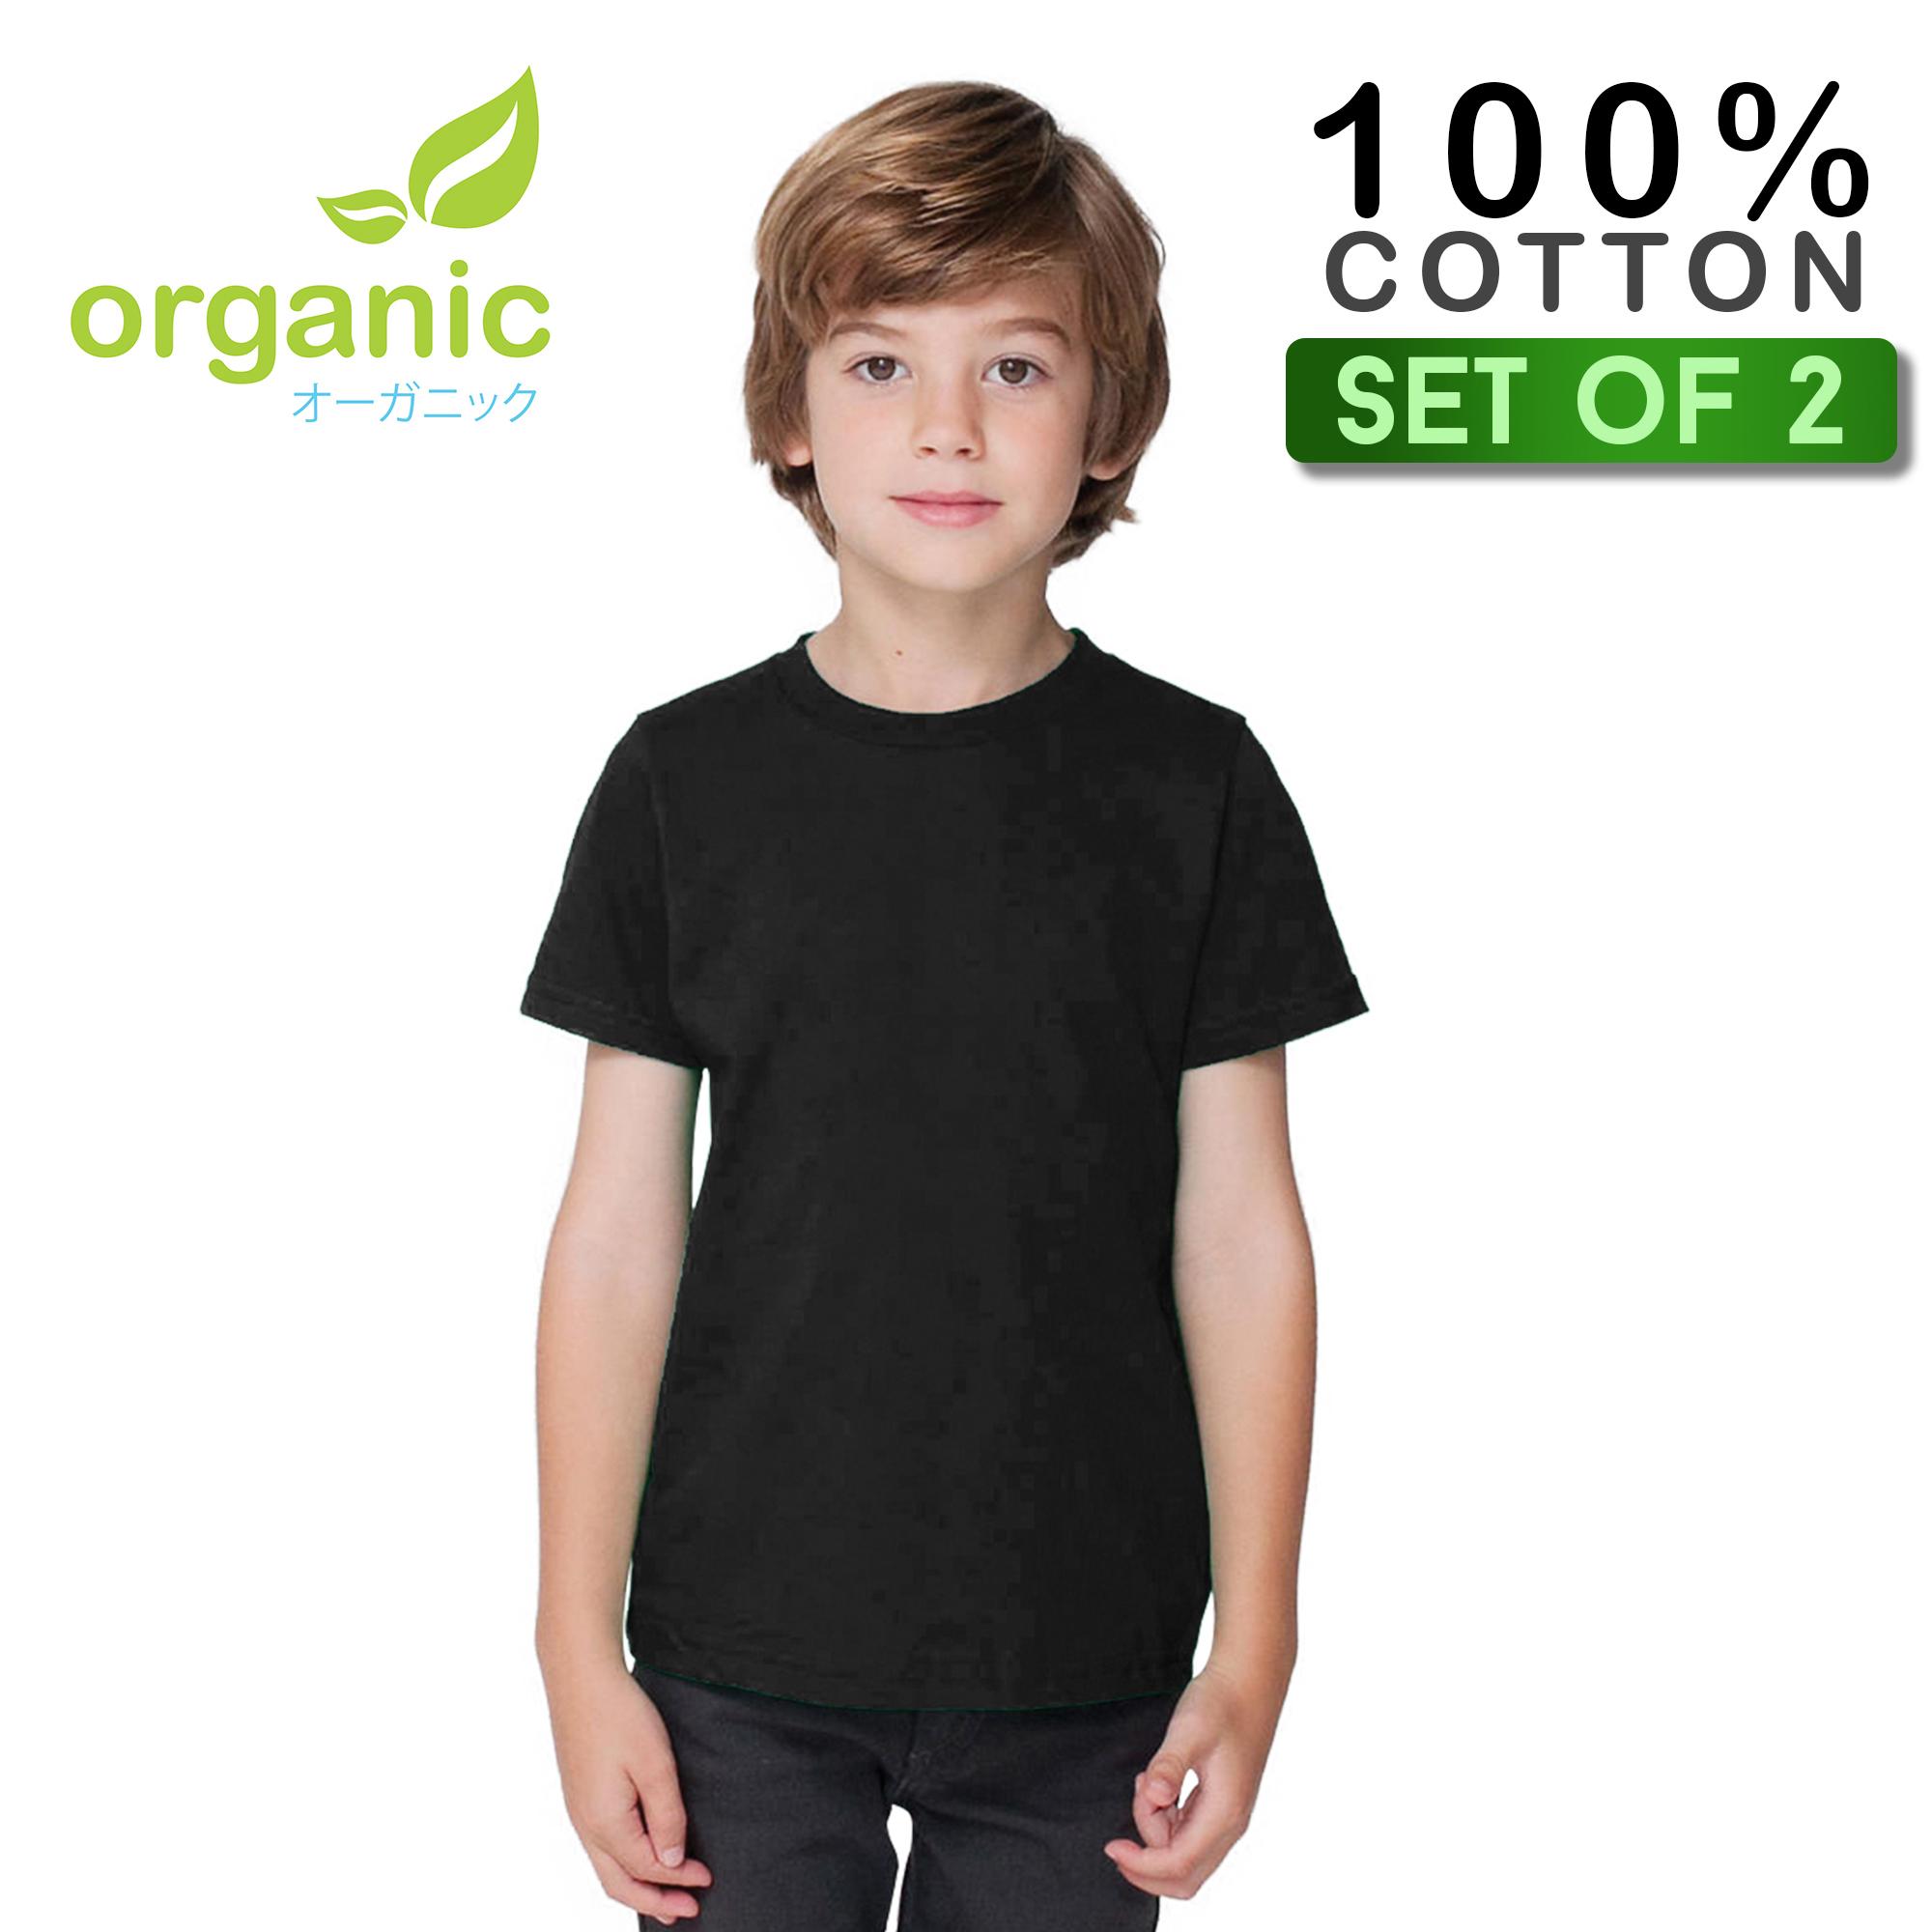 Boys Shirts For Sale T Shirts For Boys Online For Sale With Great Prices Deals Lazada Com Ph - 3d print roblox t shirts baby boy cute tops cotton t shirt cartoon tshirt clothing short sleeves children summer kid 2019 tees